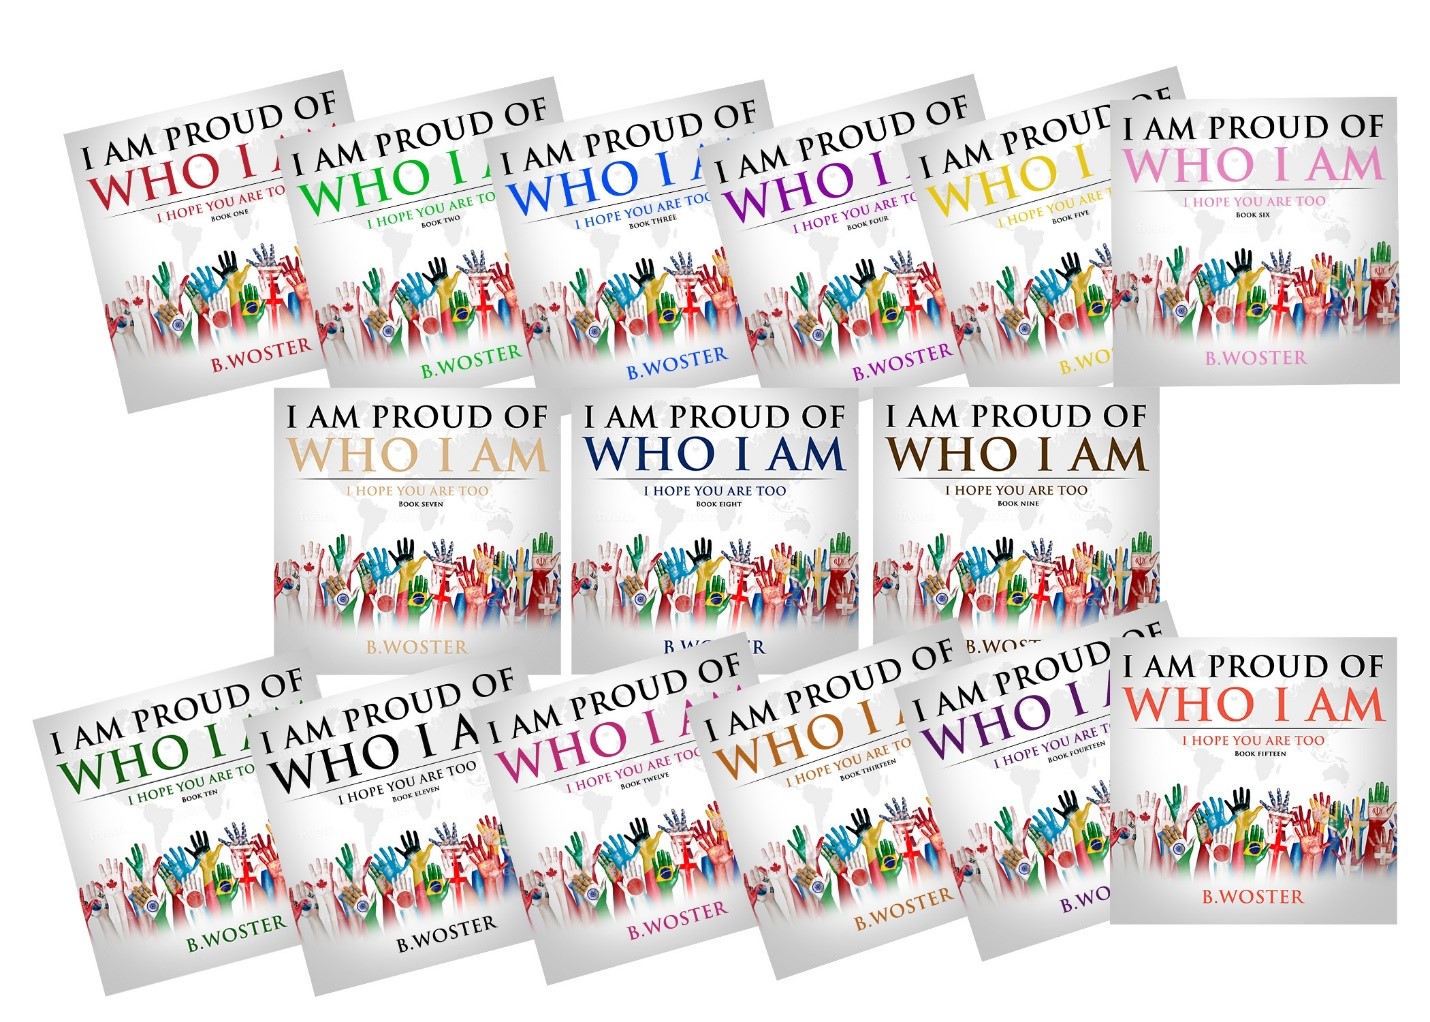 Author Barbara Woster’s Series Titled "I Am Proud of Who I Am: I Hope You Are Too," Is Earning Rave Reviews and Inspiring Young Readers